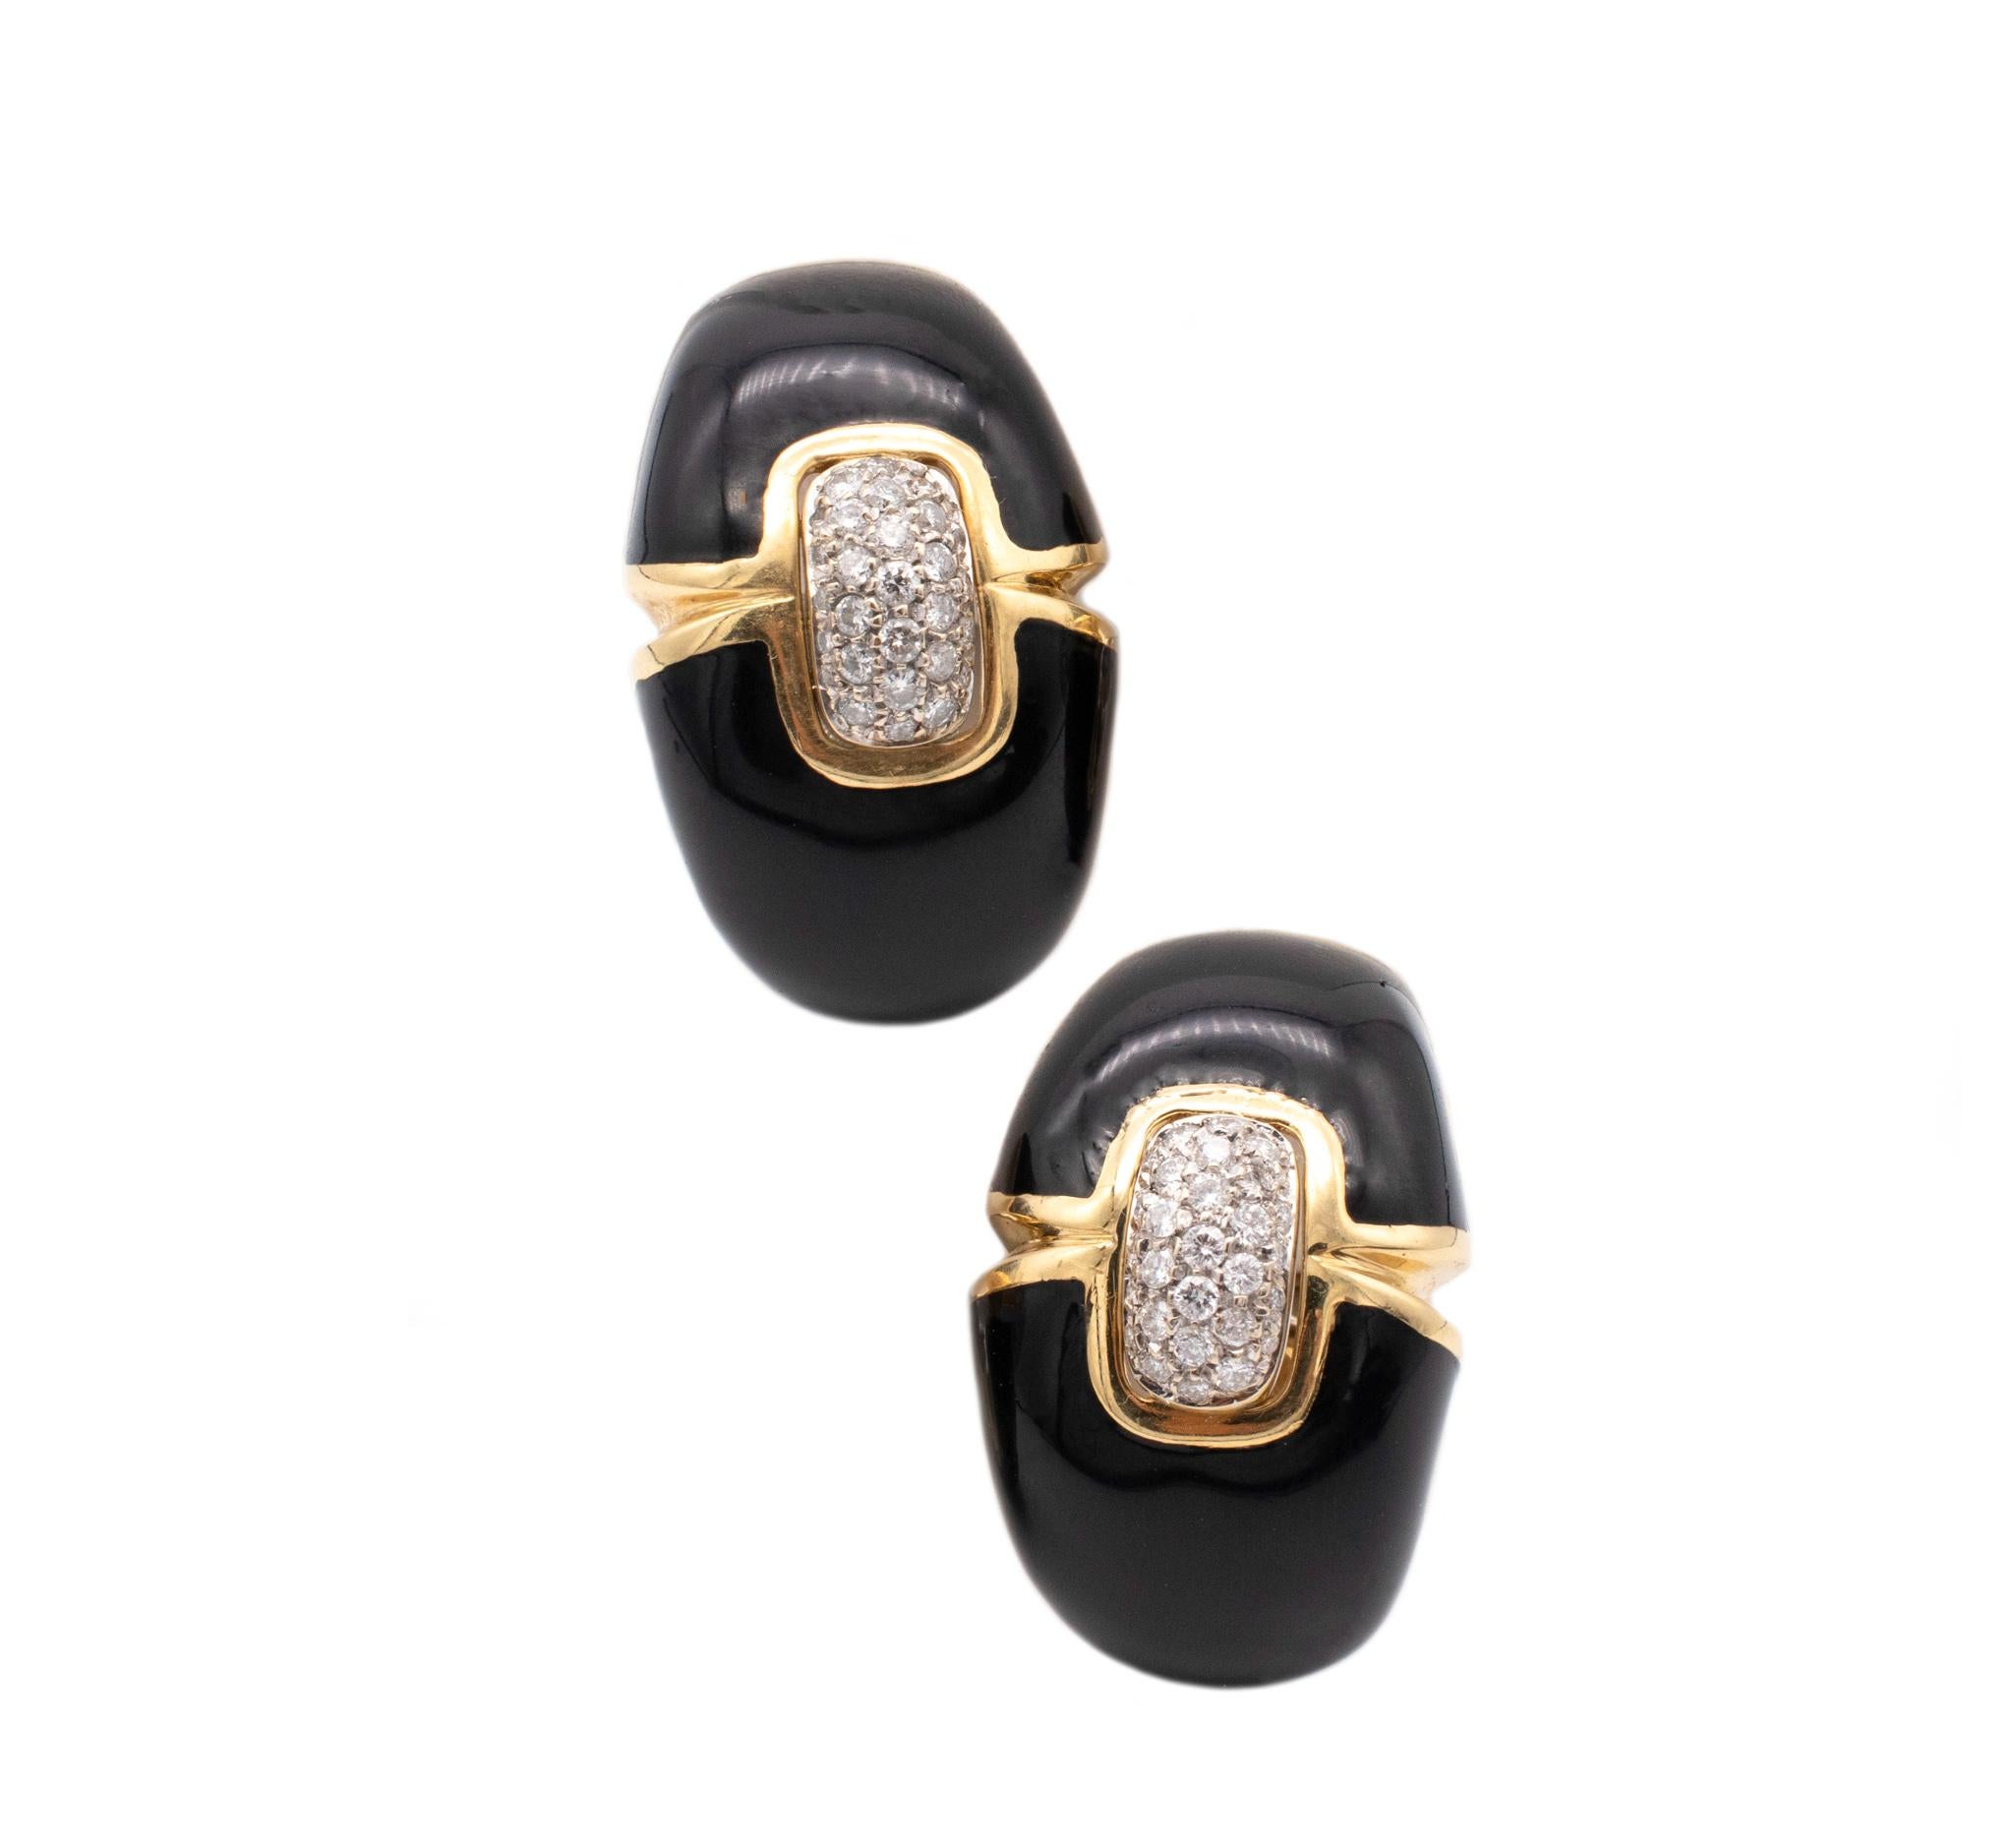 Beautiful pair of earrings designed by Roberto Legnazzi.

Very chic and elegant vintage pair of earrings designed in Italy by the jewelry Atelier of Roberto Legnazzi. They was crafted in solid yellow gold of 18 karats, with high polish finish and a